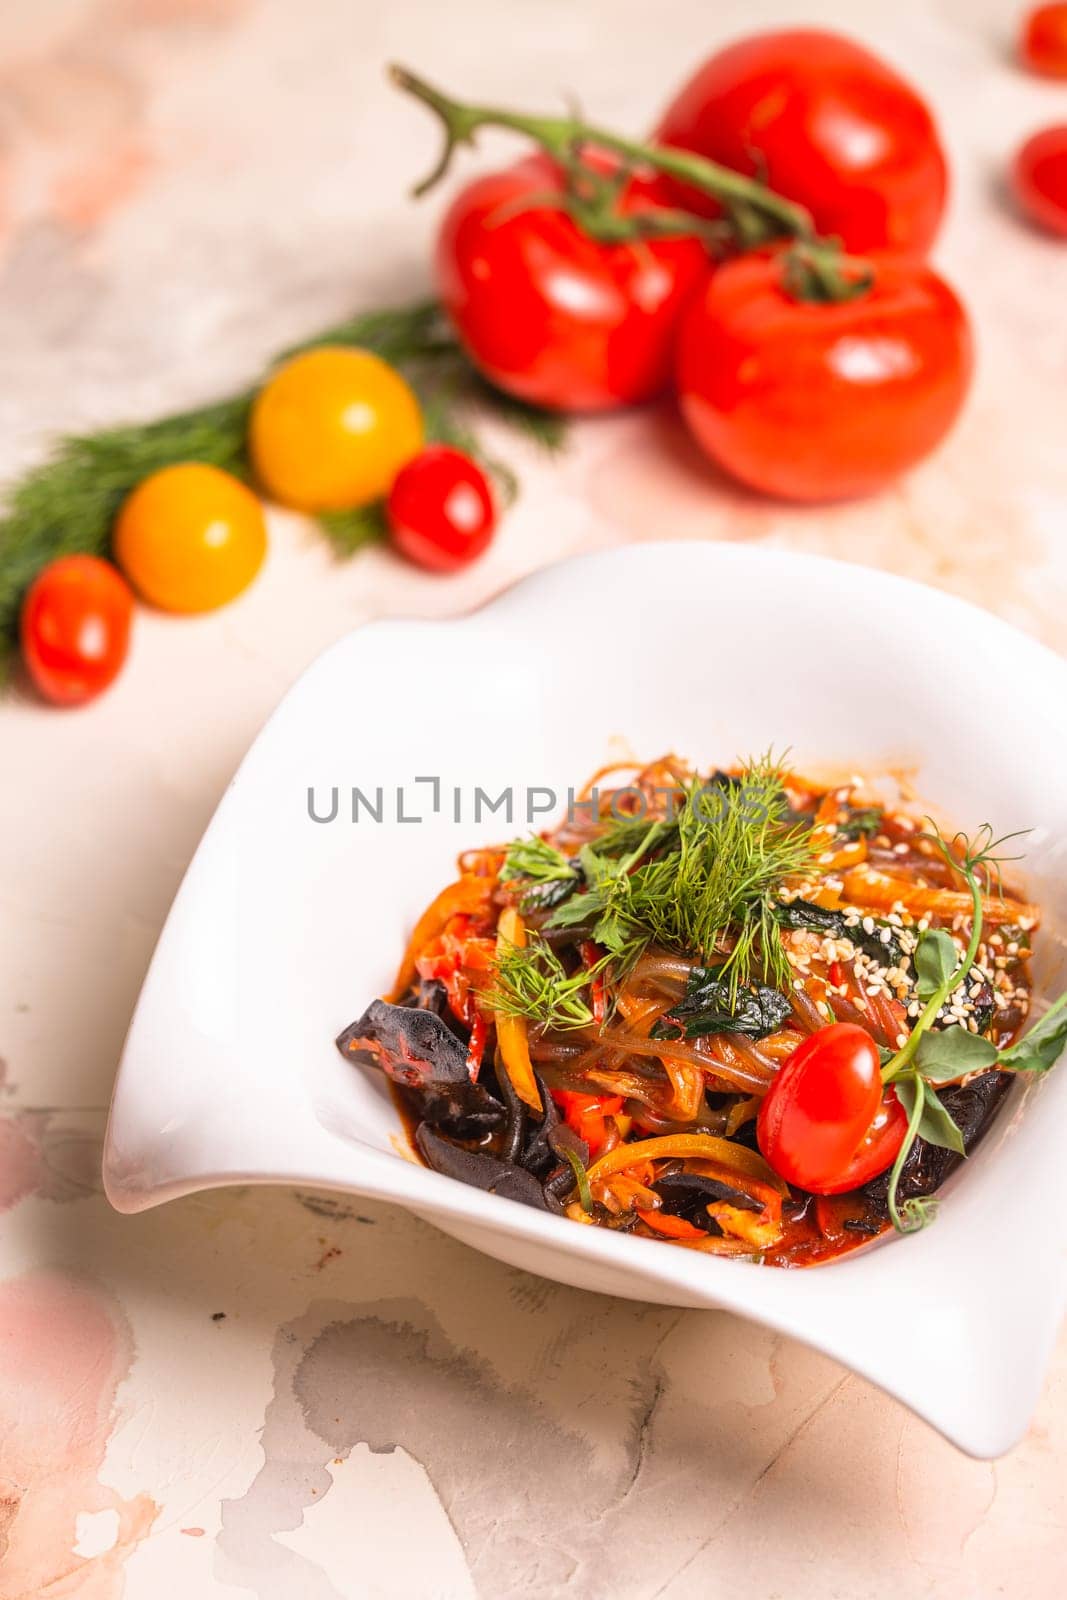 Tasty Japchae with Sweet Potato Noodles, Fresh Veggies, Tomatoes, and Dill by Pukhovskiy